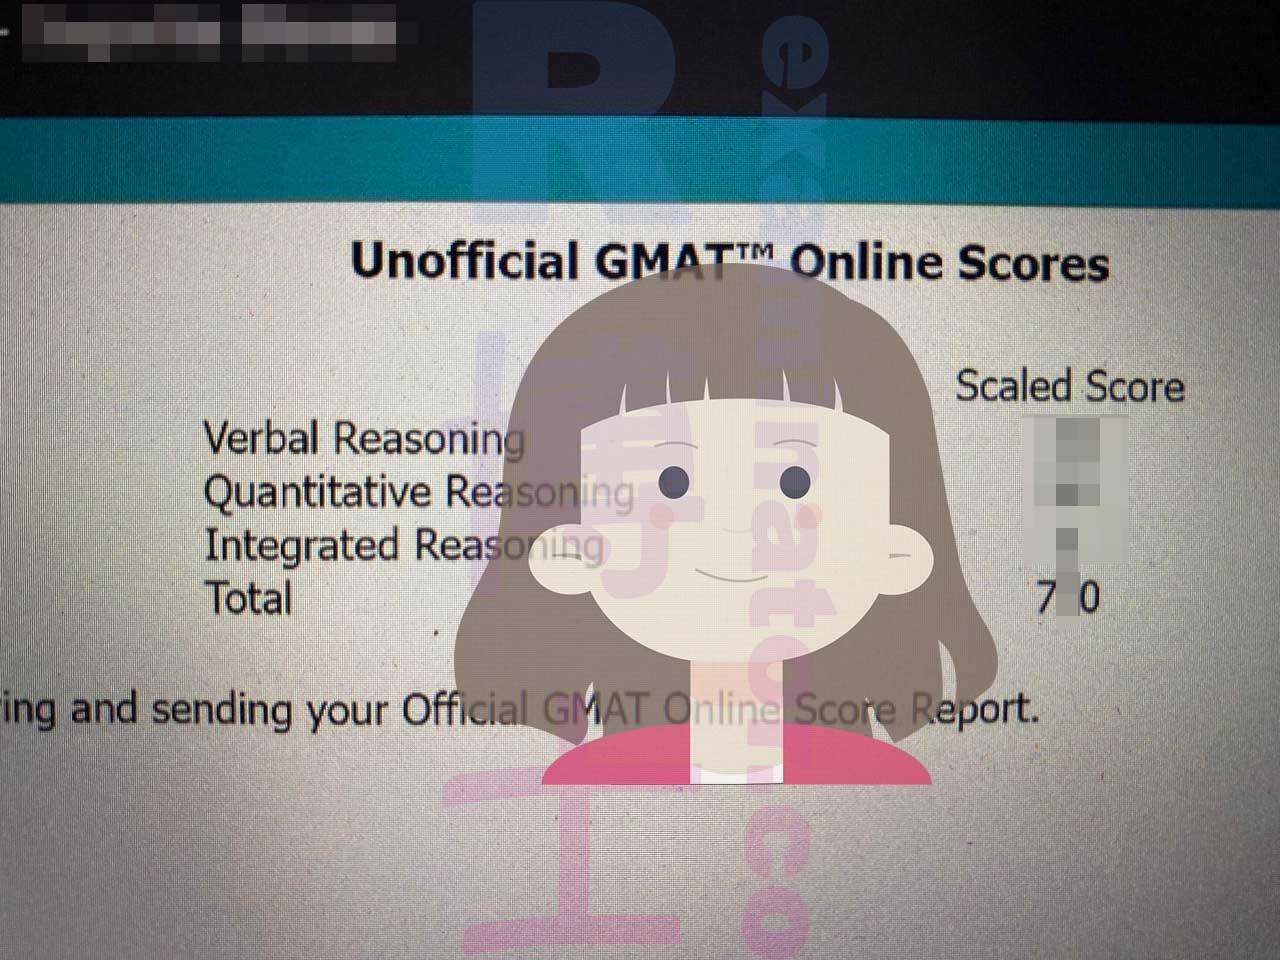 🎉🇬🇧London Customer Beats Expectations with Our GMAT Online Proxy Testing Service - Hear Their Incredible Reaction! Don't Worry About "In Progress" Exam Status" 🎉💯🦄